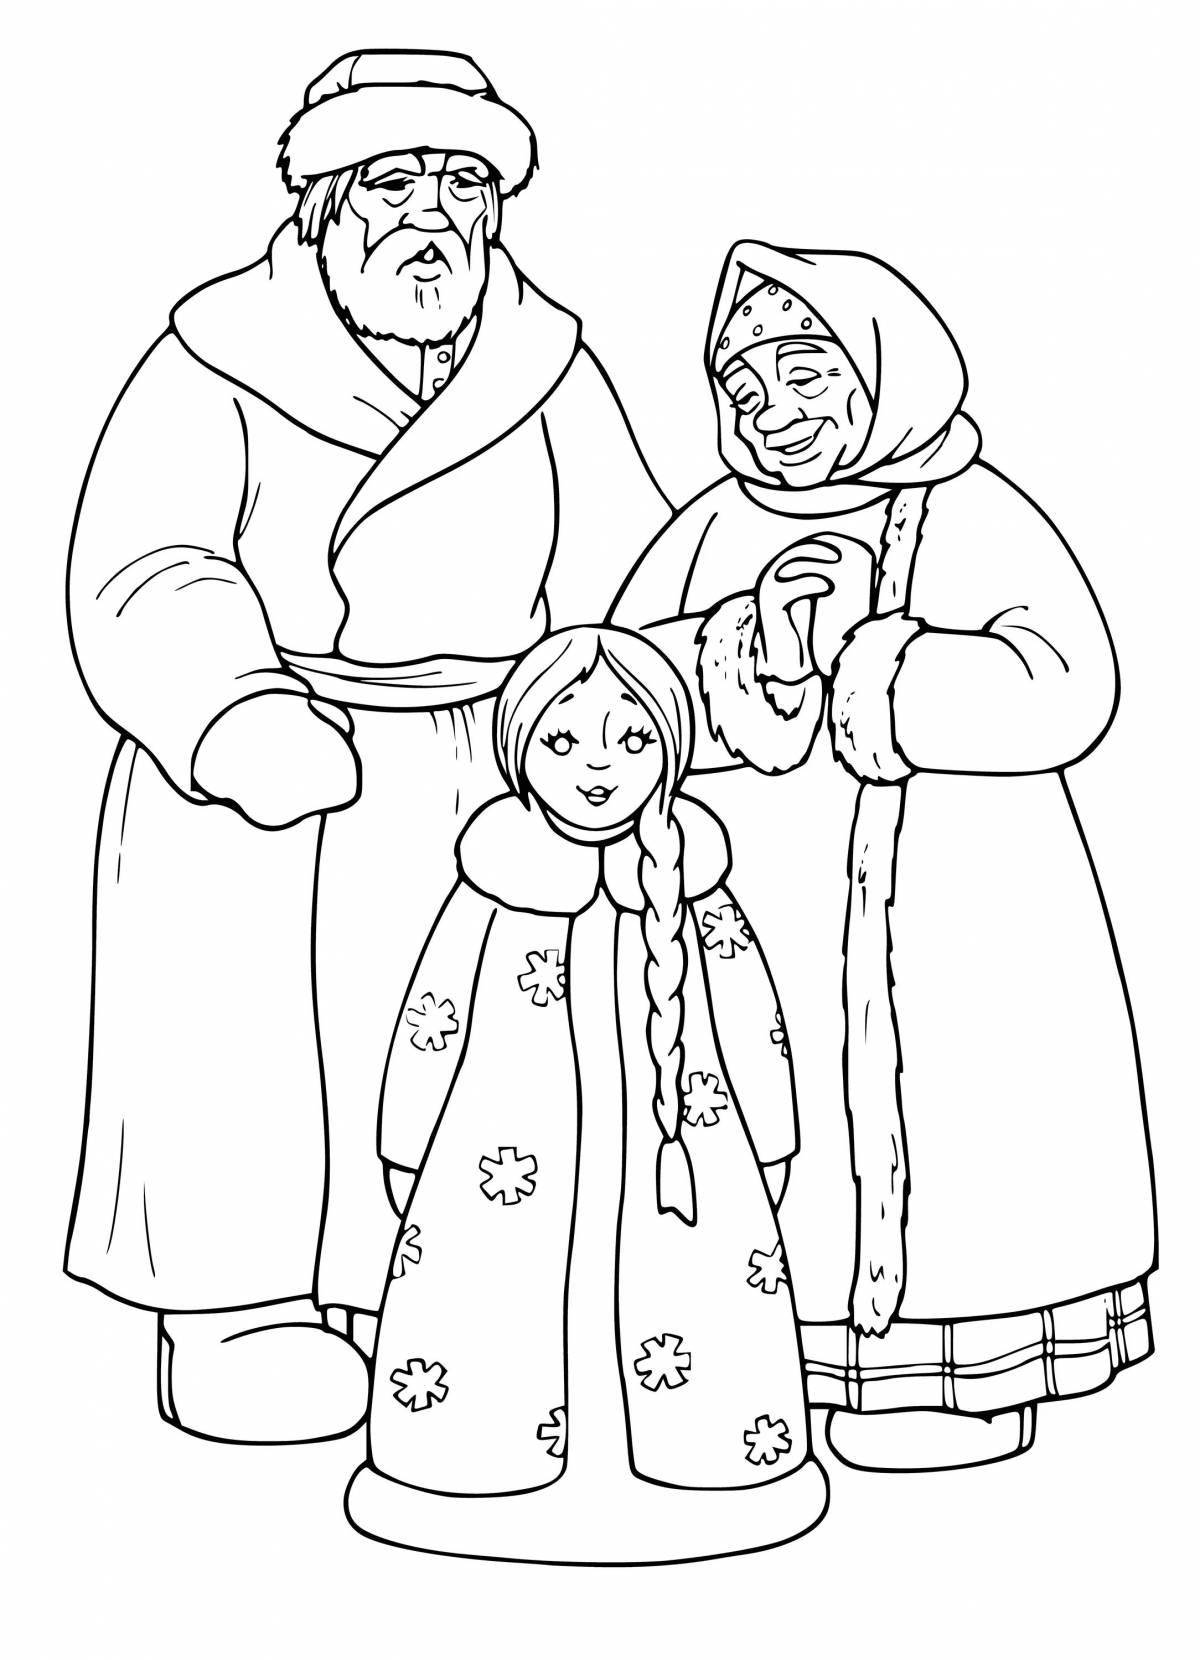 Caring grandparents coloring page